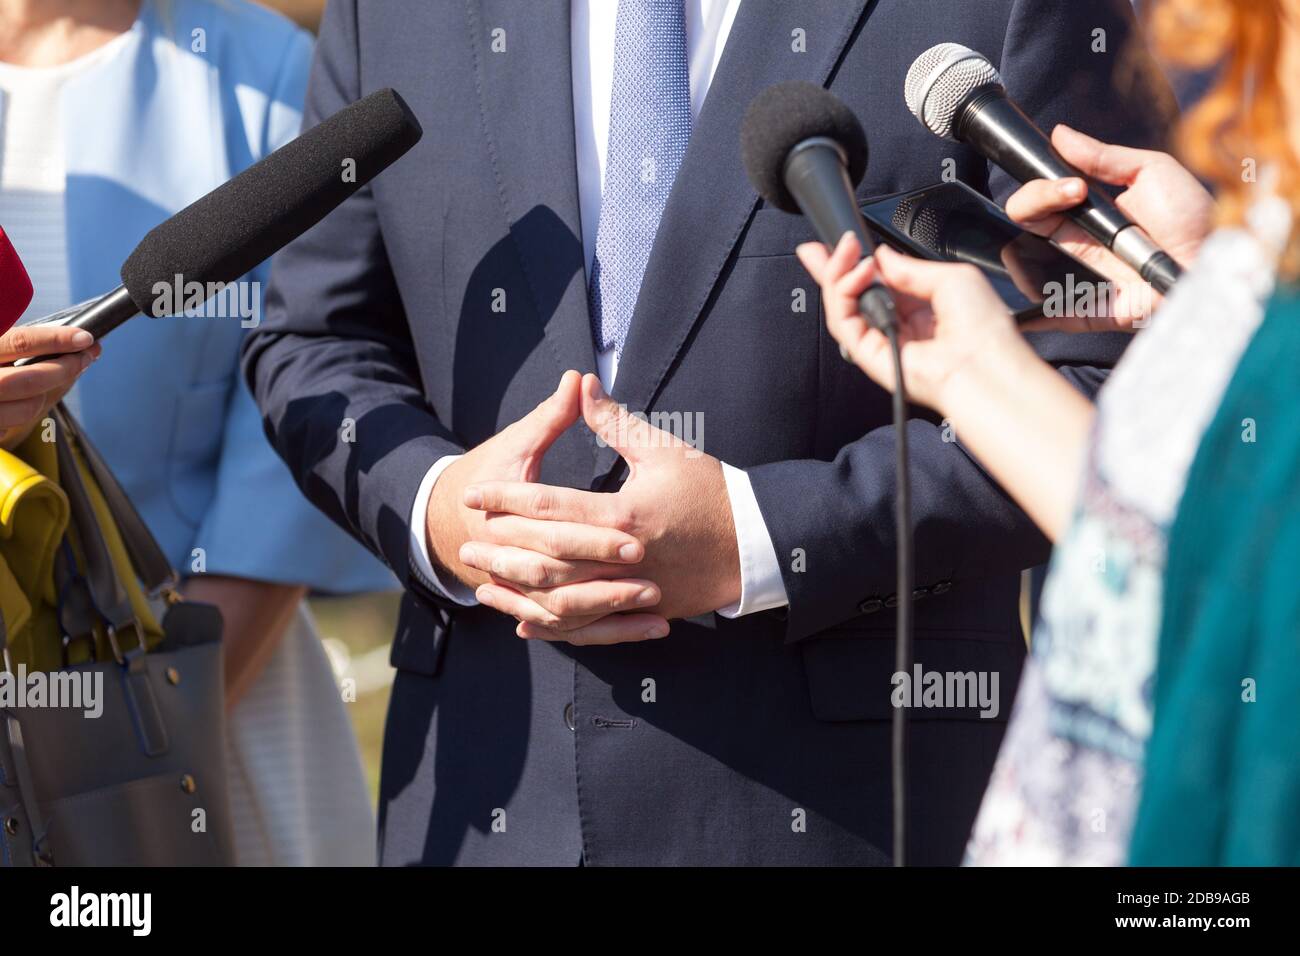 Journalists making media interview with businessman or politician Stock Photo